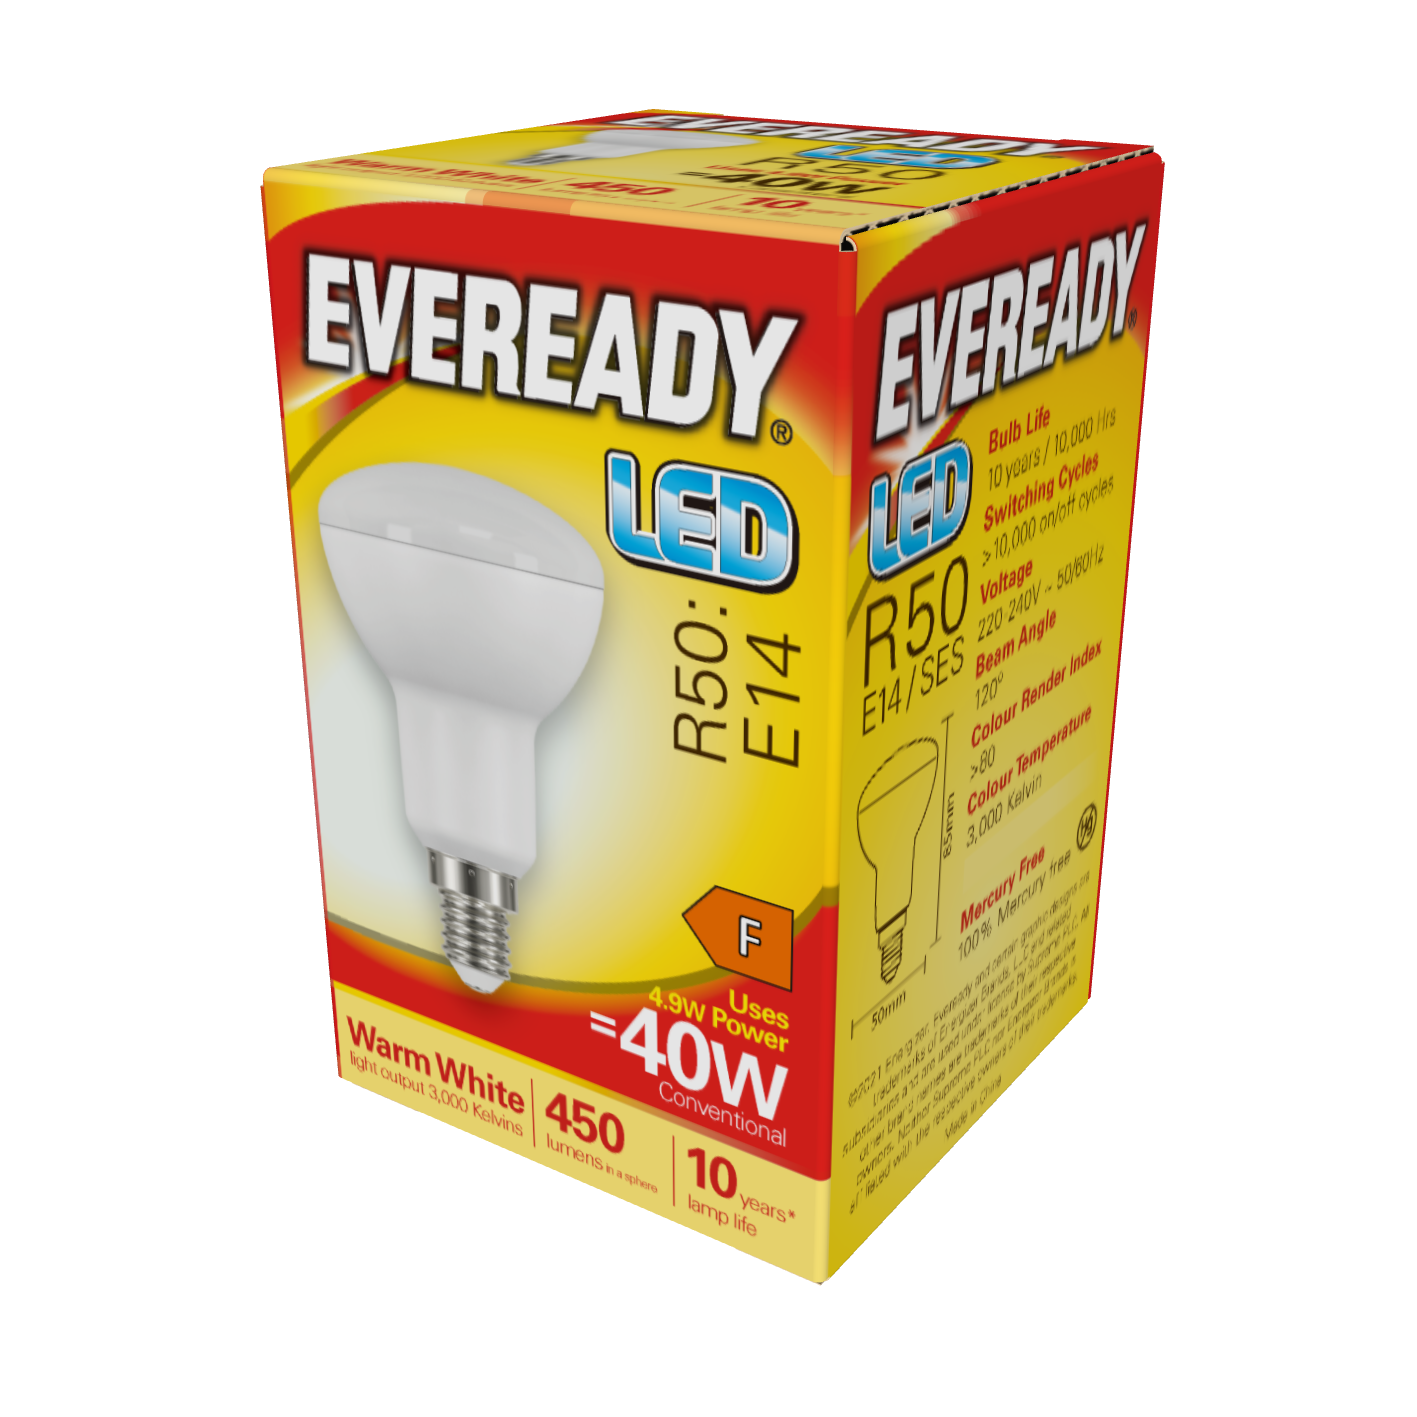 Eveready LED R50 Reflector E14 (SES) 450lm 4.9W 3,000K (Warm White), Box of 1